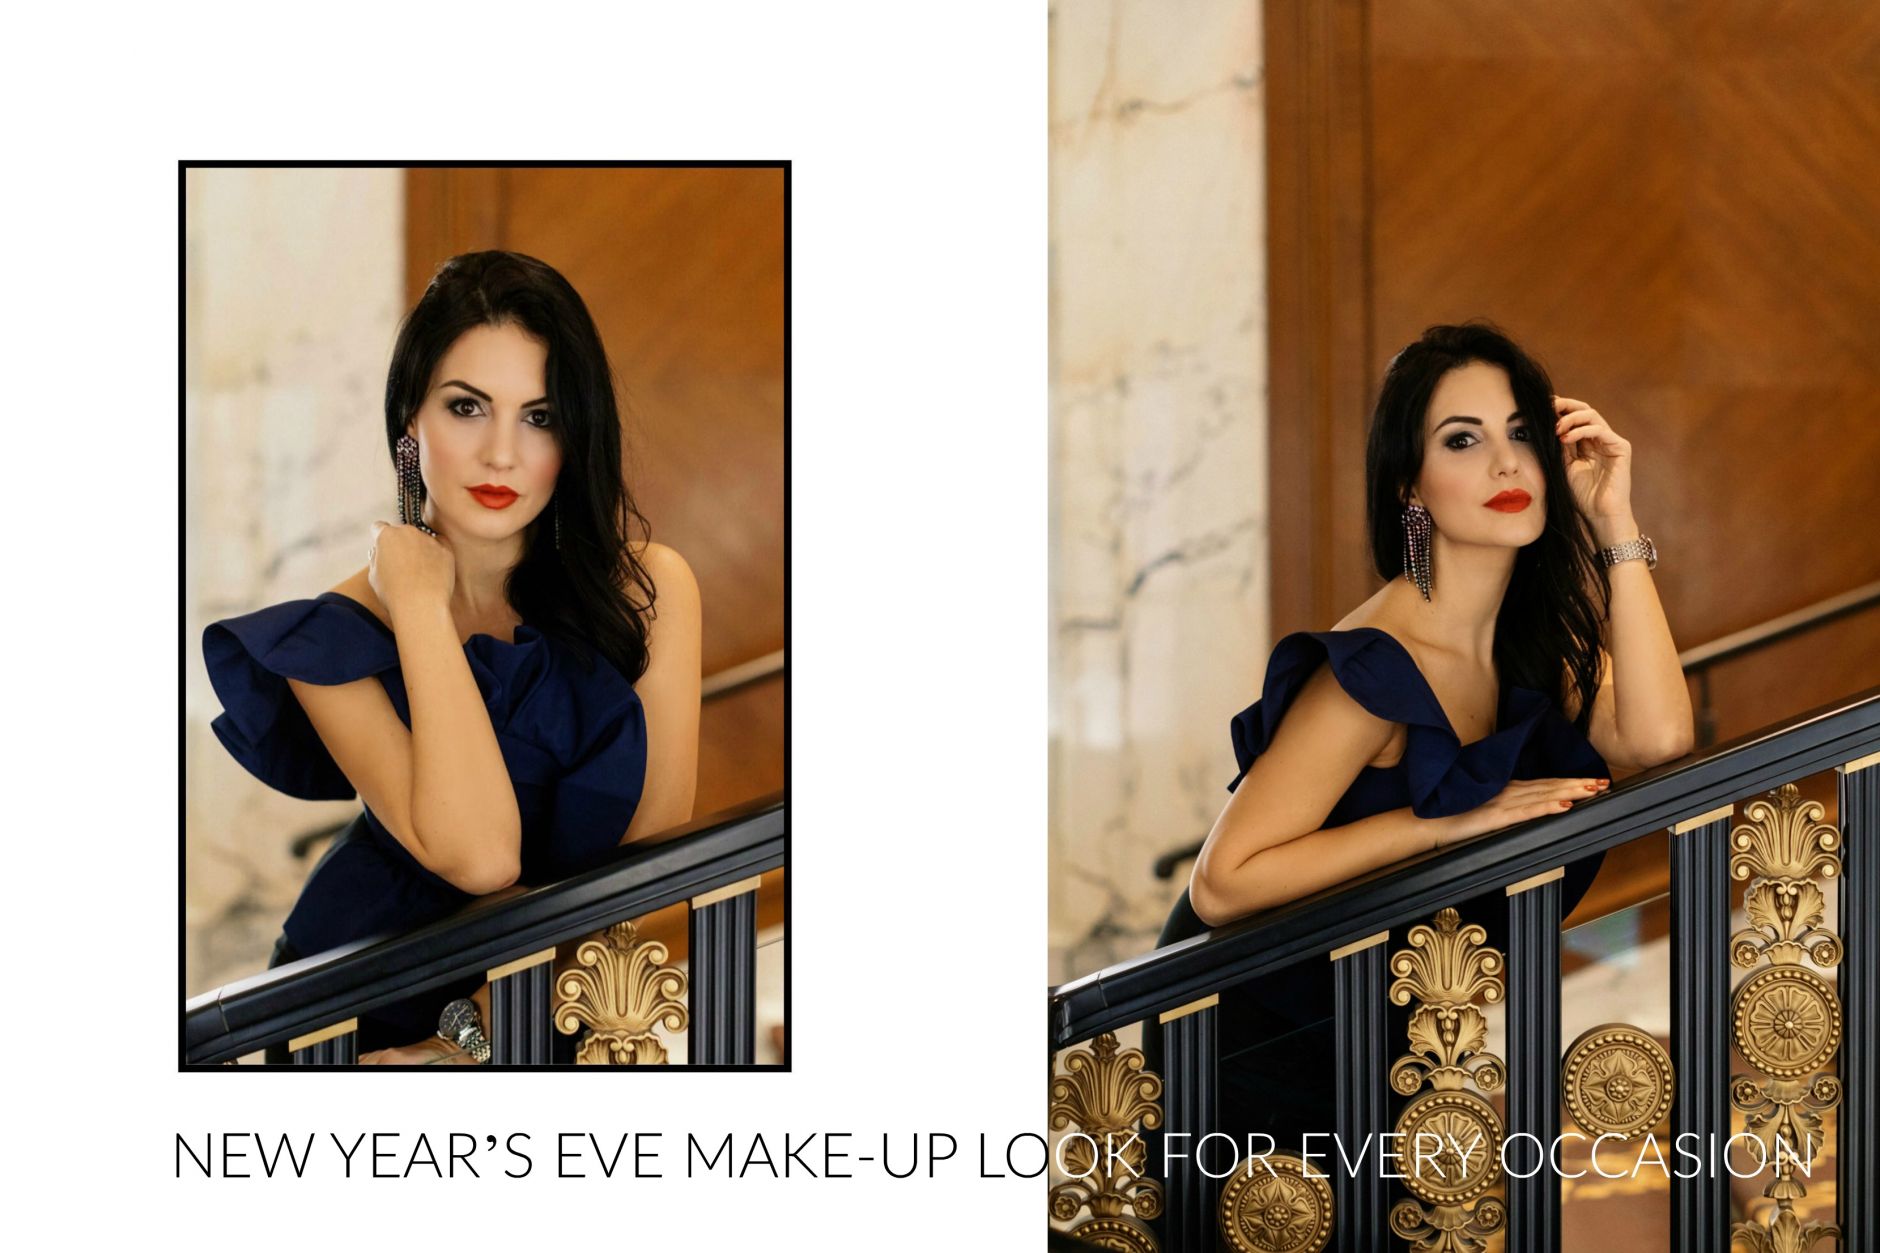 NEW YEAR’S EVE MAKE-UP LOOK